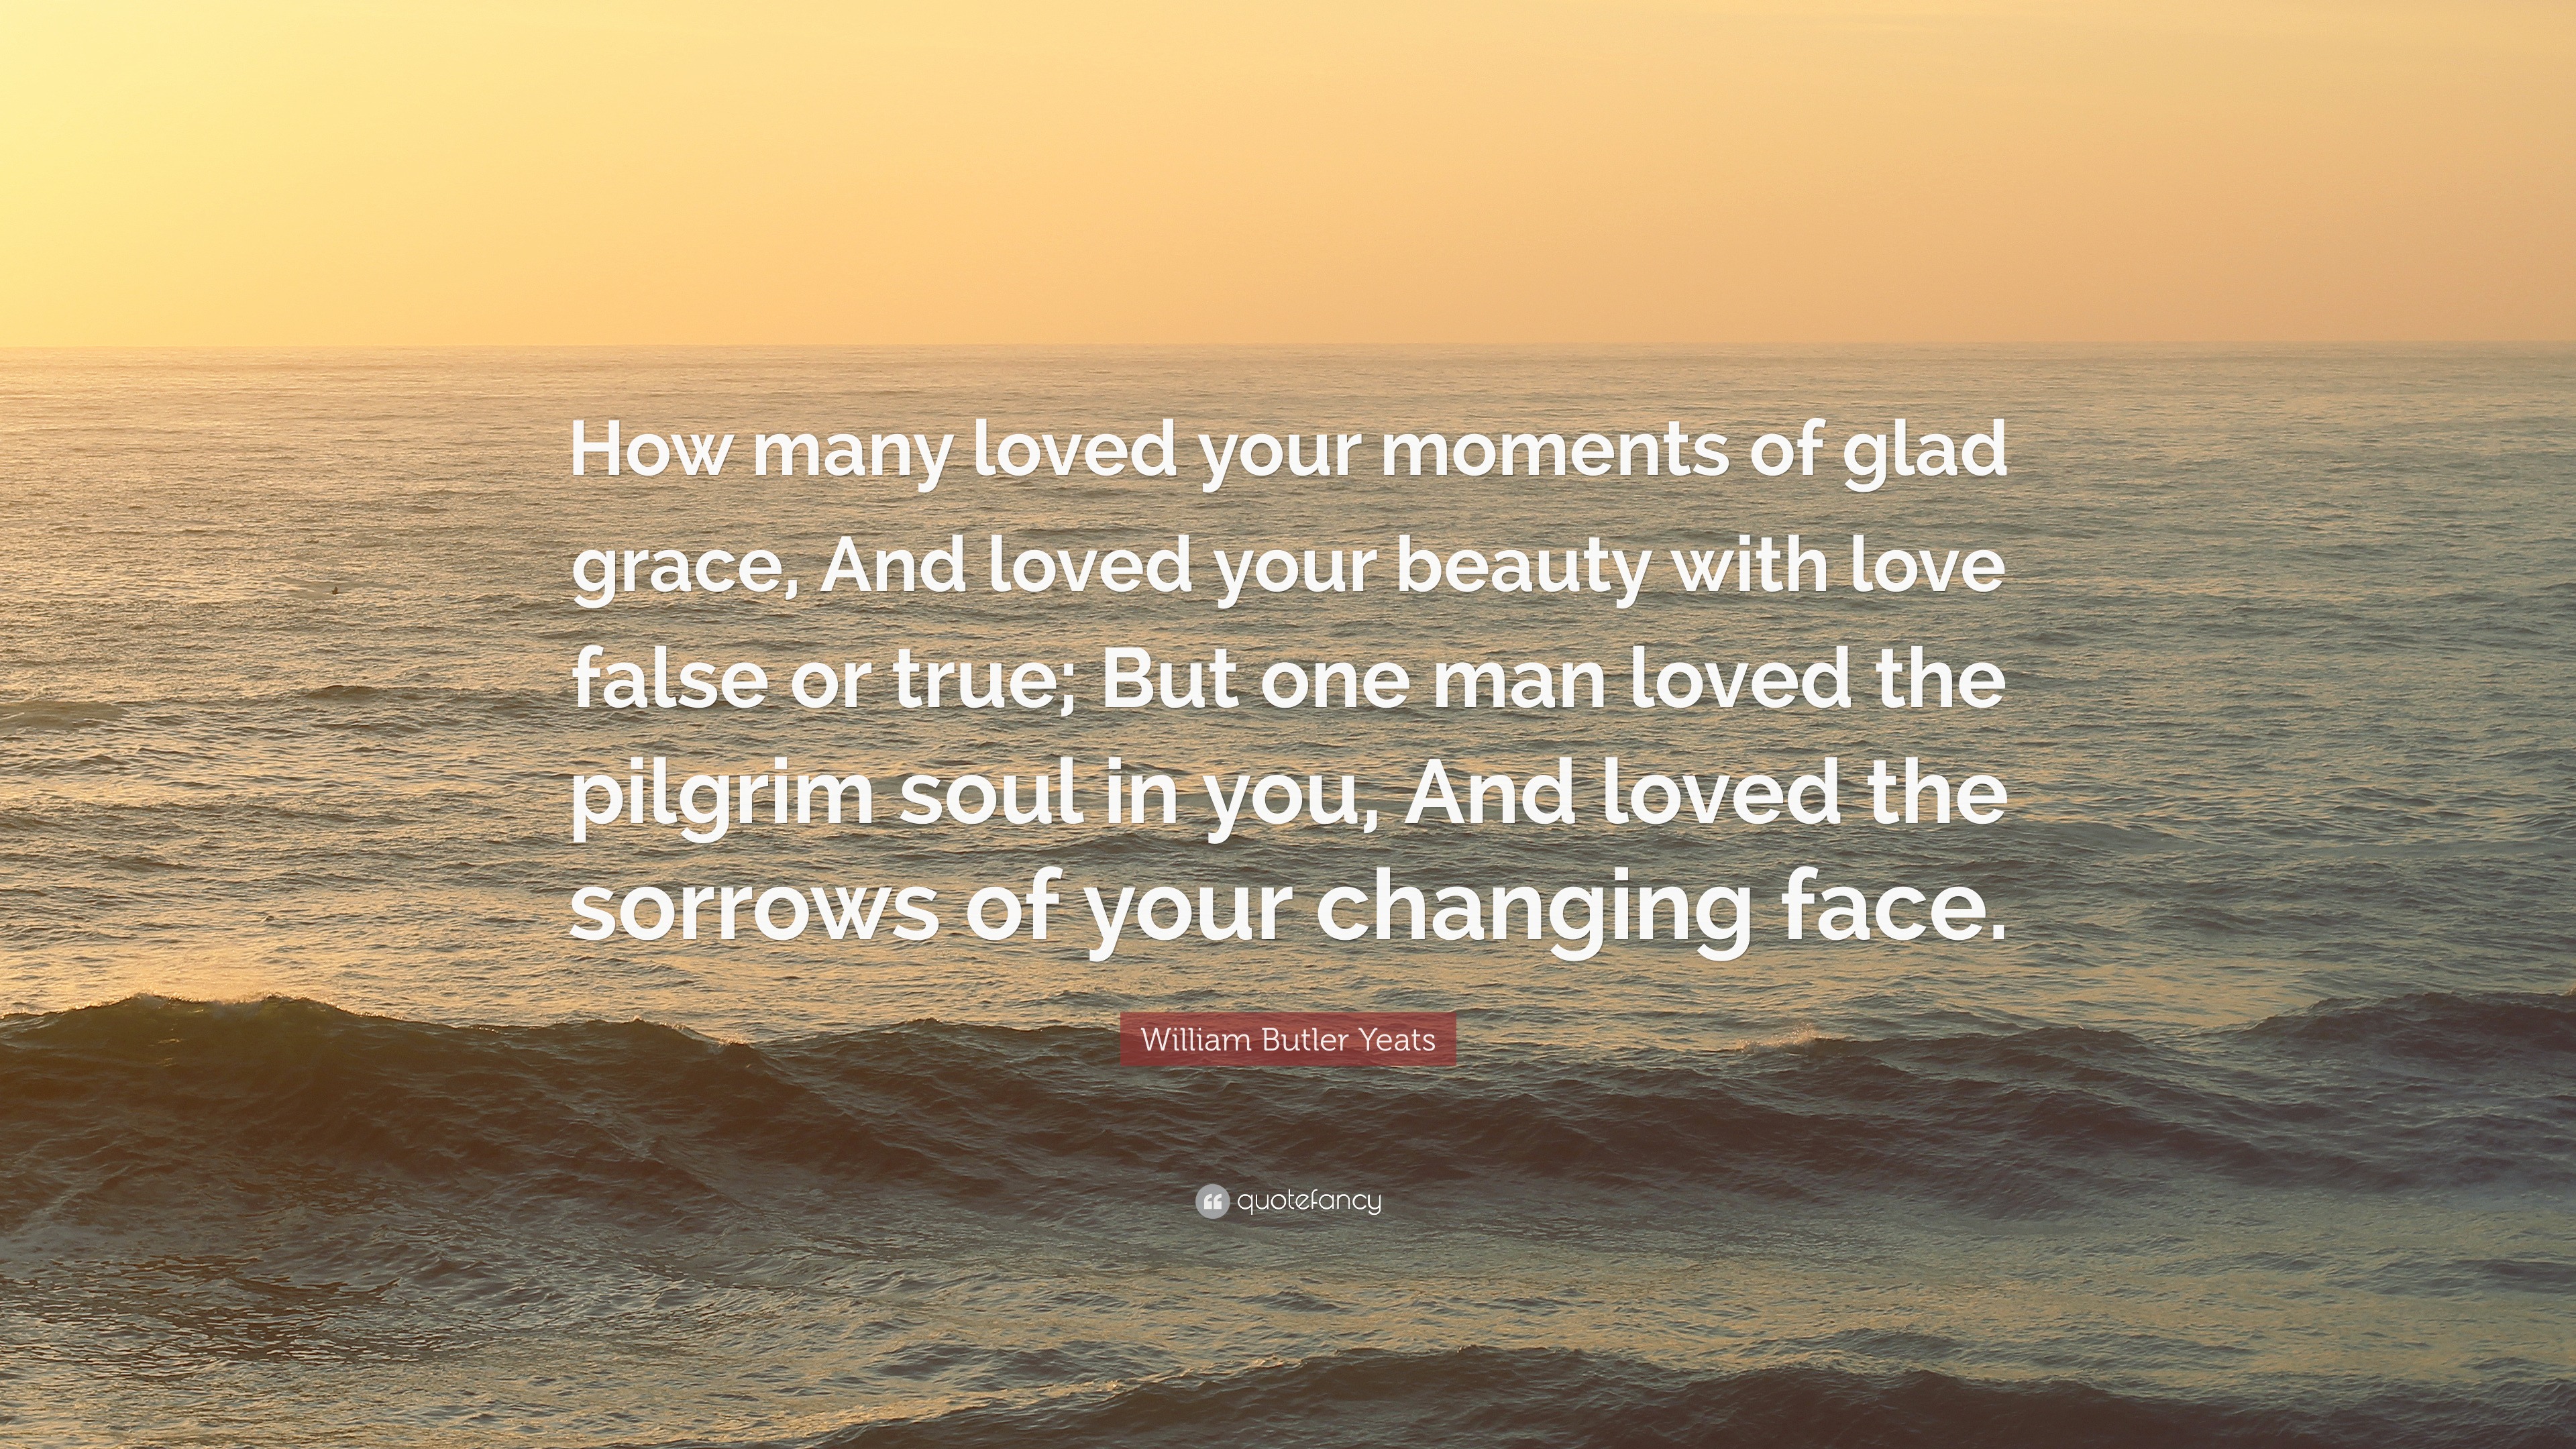 William Butler Yeats Quote “How many loved your moments of glad grace